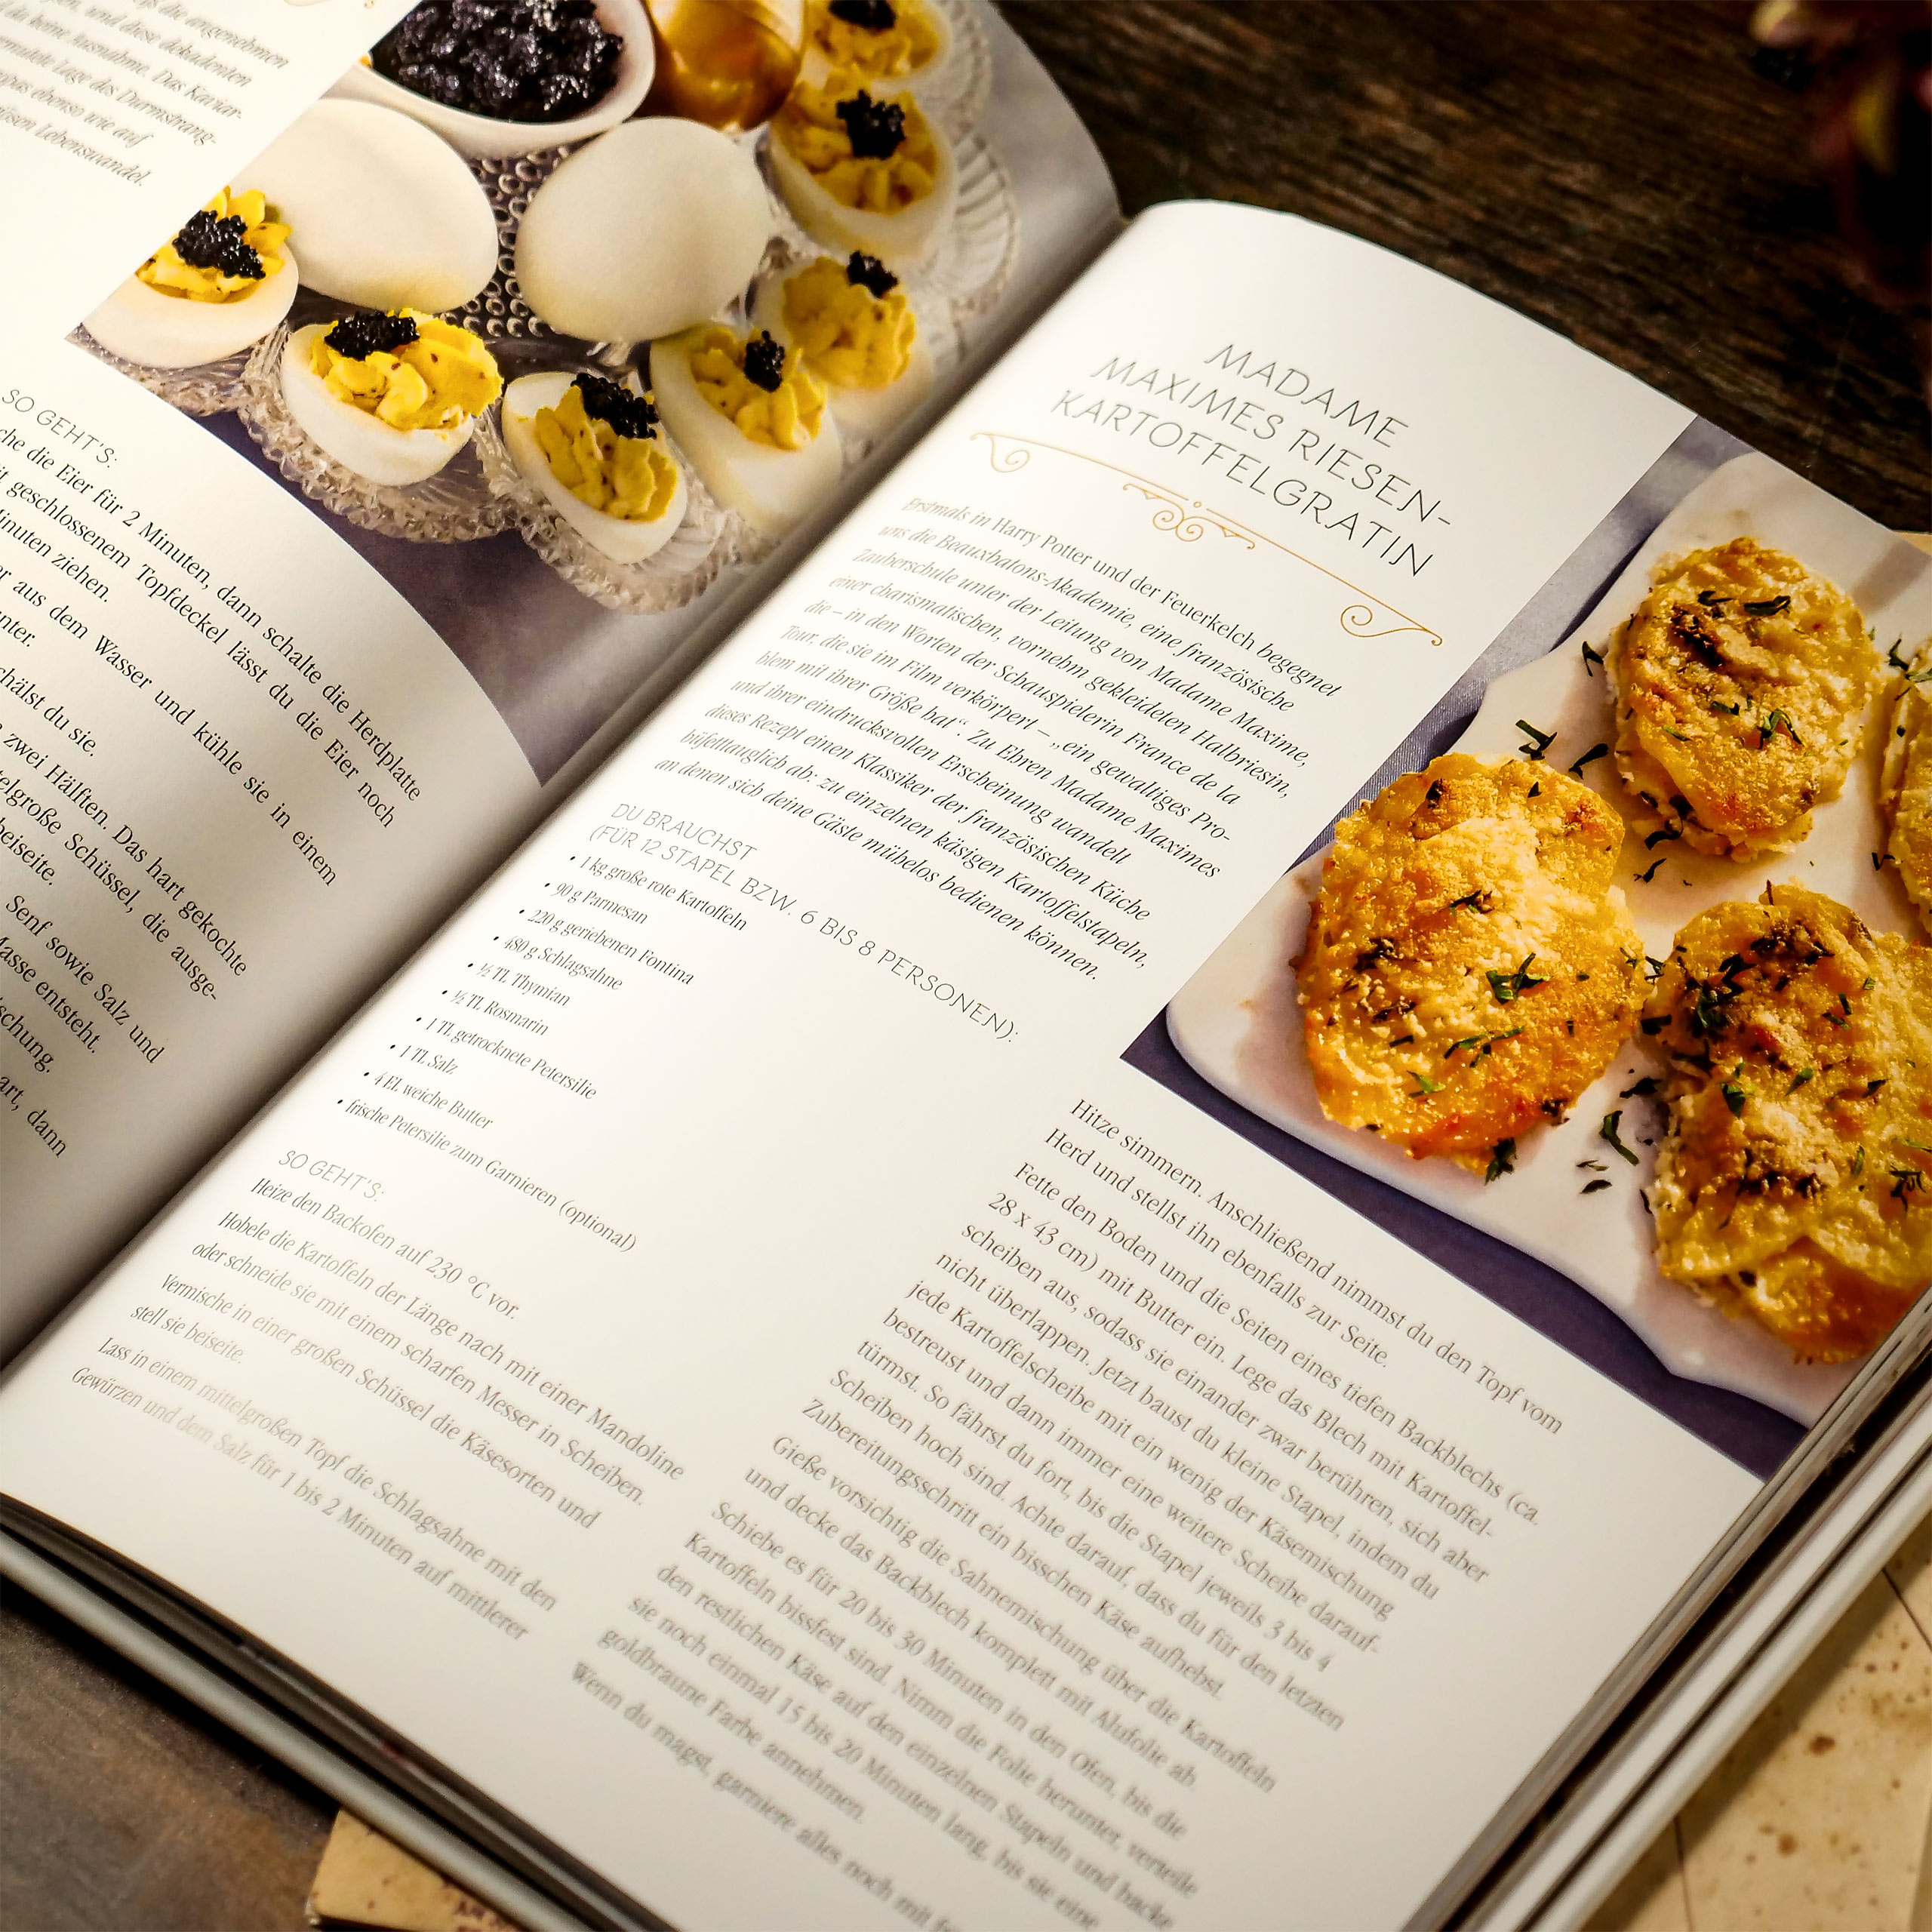 Harry Potter - The Official Cooking and Baking Book